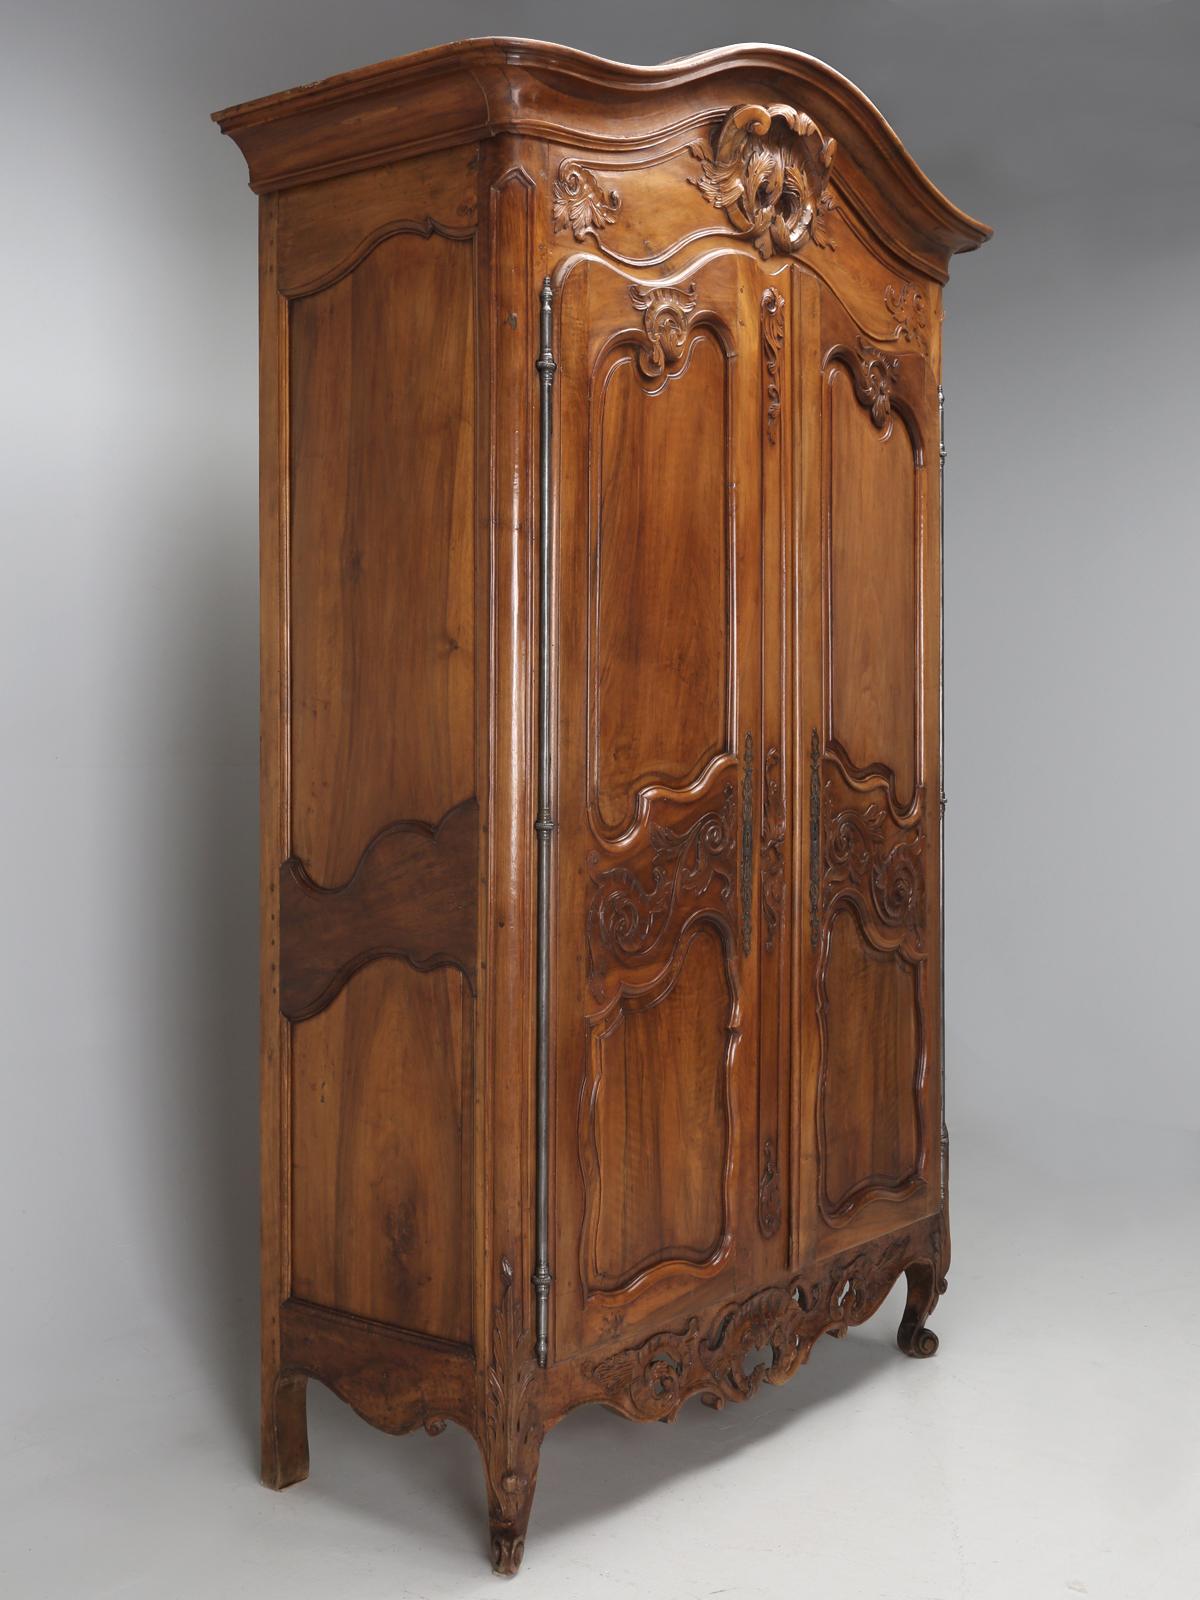 Antique Large Walnut French Armoire from the 1700's. Louis XV, ruled as King of France from 1715, until 1774. Over the years, we have imported some pretty spectacular Antique French Louis XV Armoires, but few finer than this example. The interior of